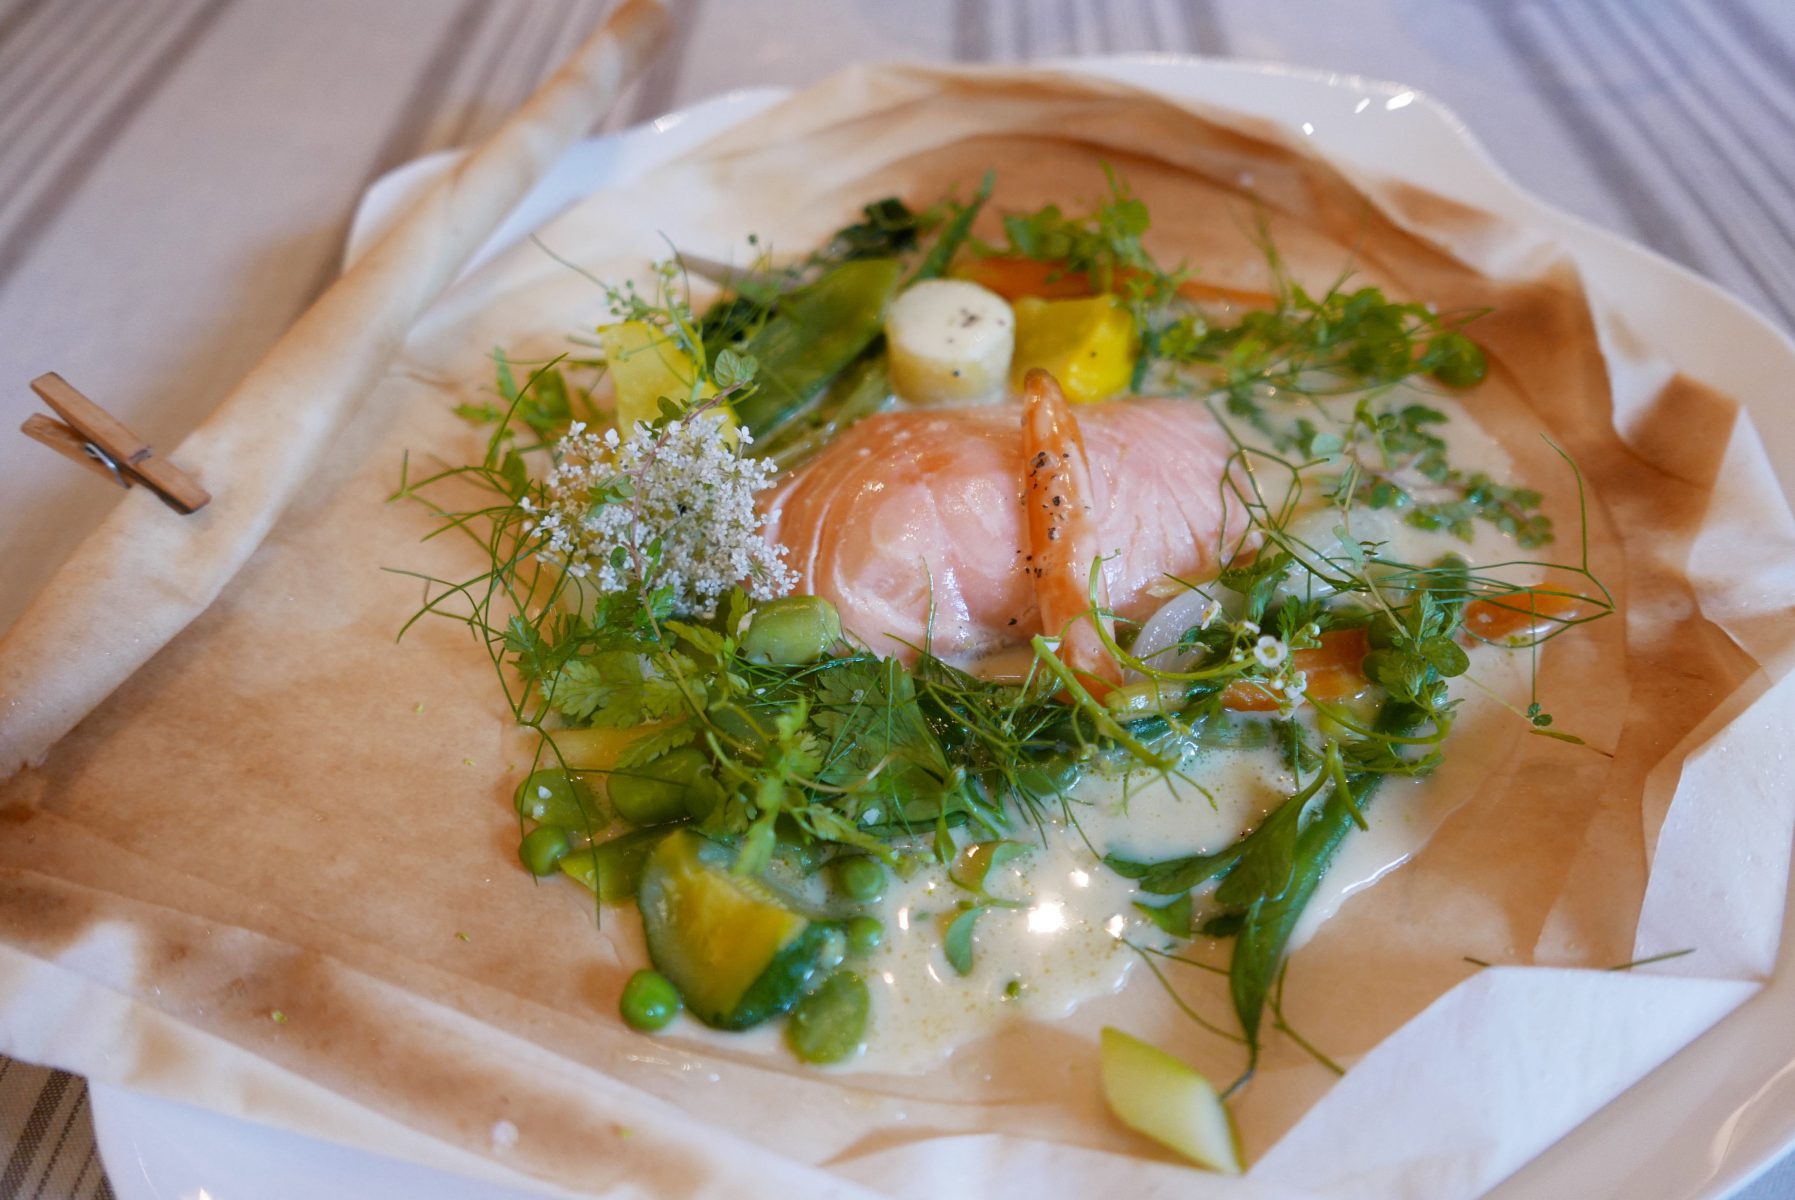 Salmon "en papillote" with vegetables from the garden and corn bouillon